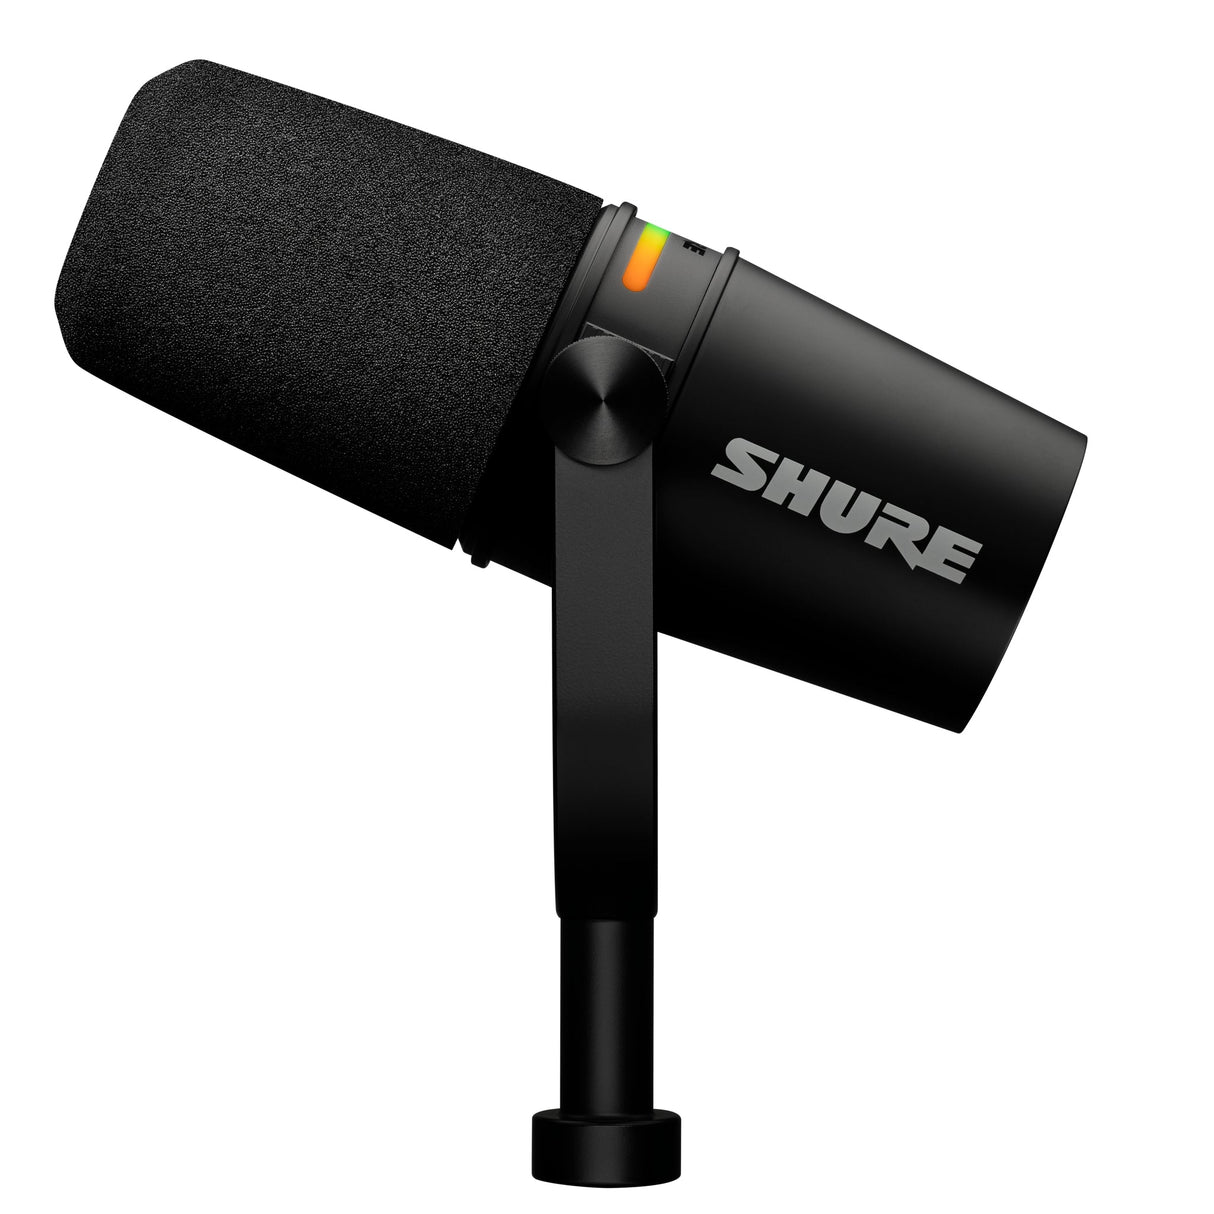 Shure MV7+ Podcast Dynamic Microphone with USB-C and XLR